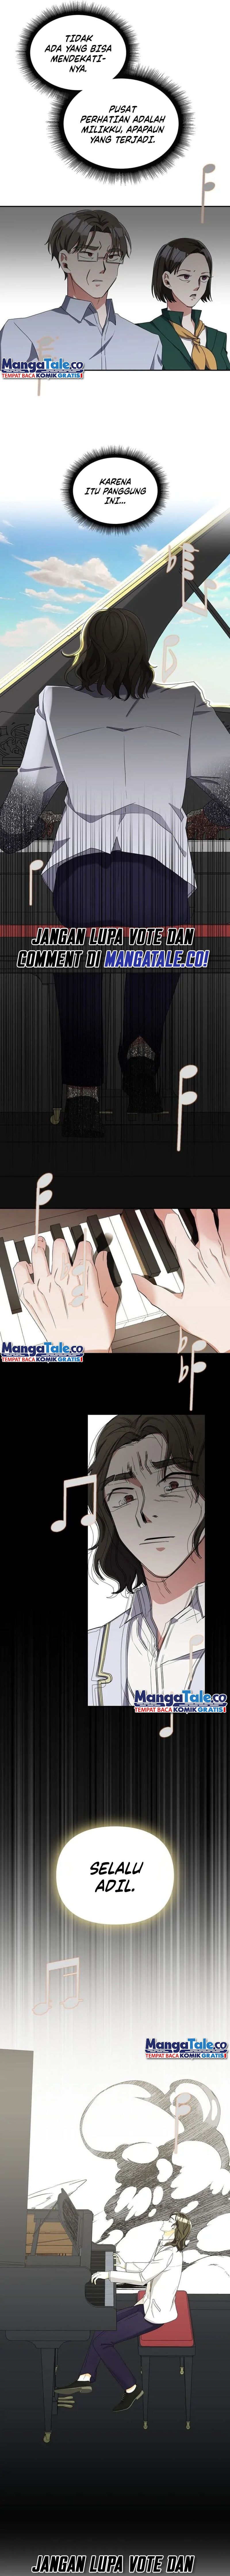 The Life of a Piano Genius Chapter 14 Image 8